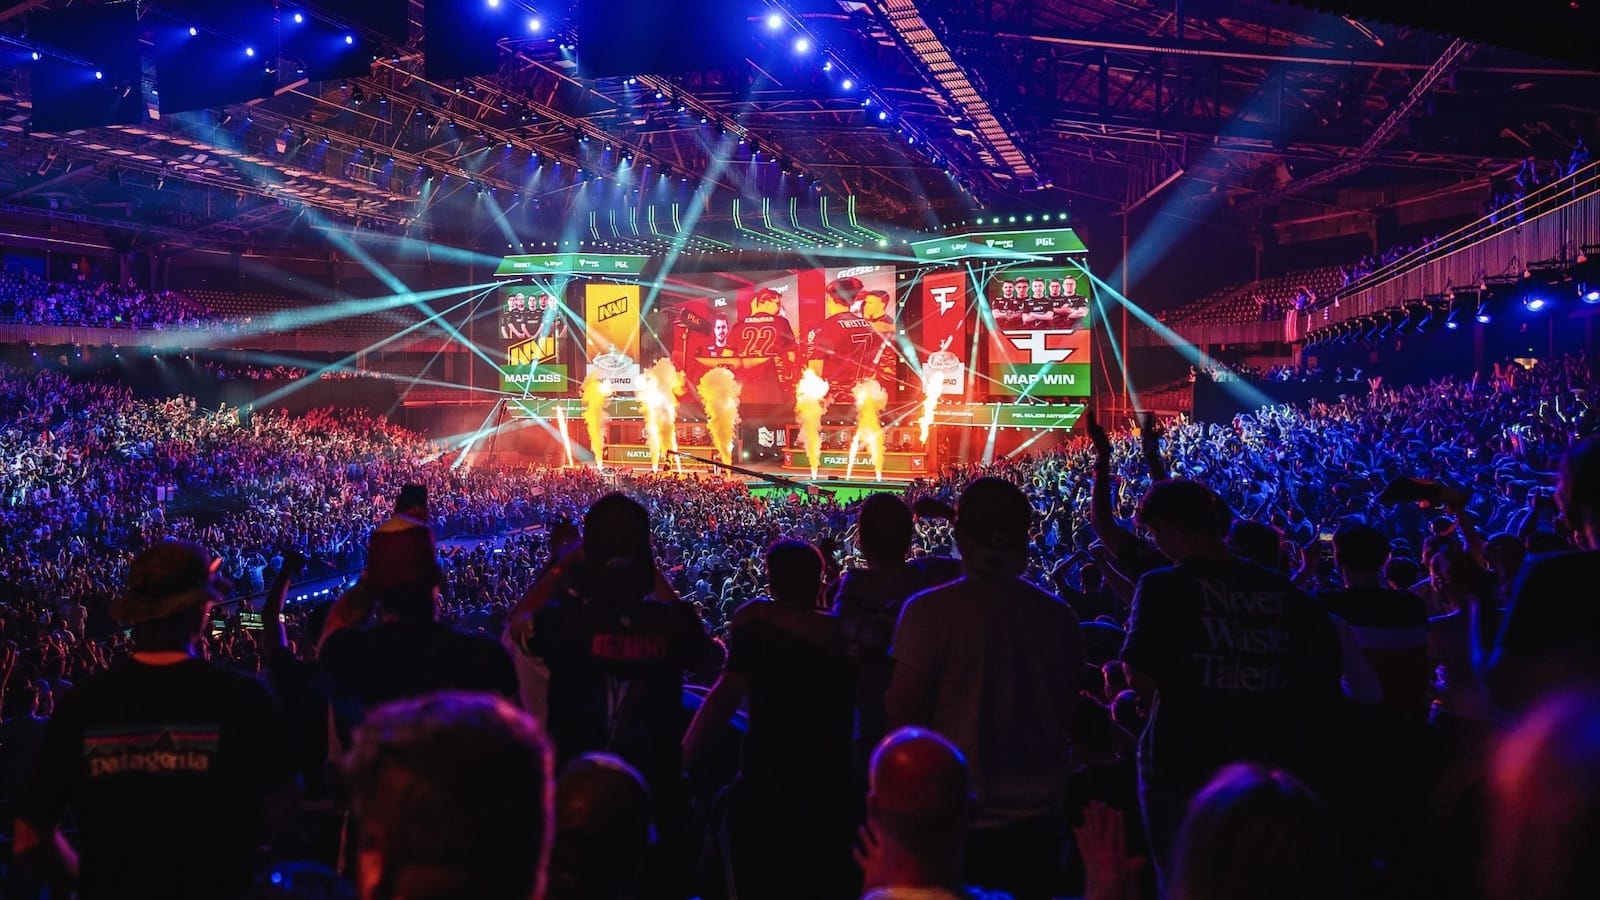 Everything you need to know about IEM Cologne 2022 Nerd Street